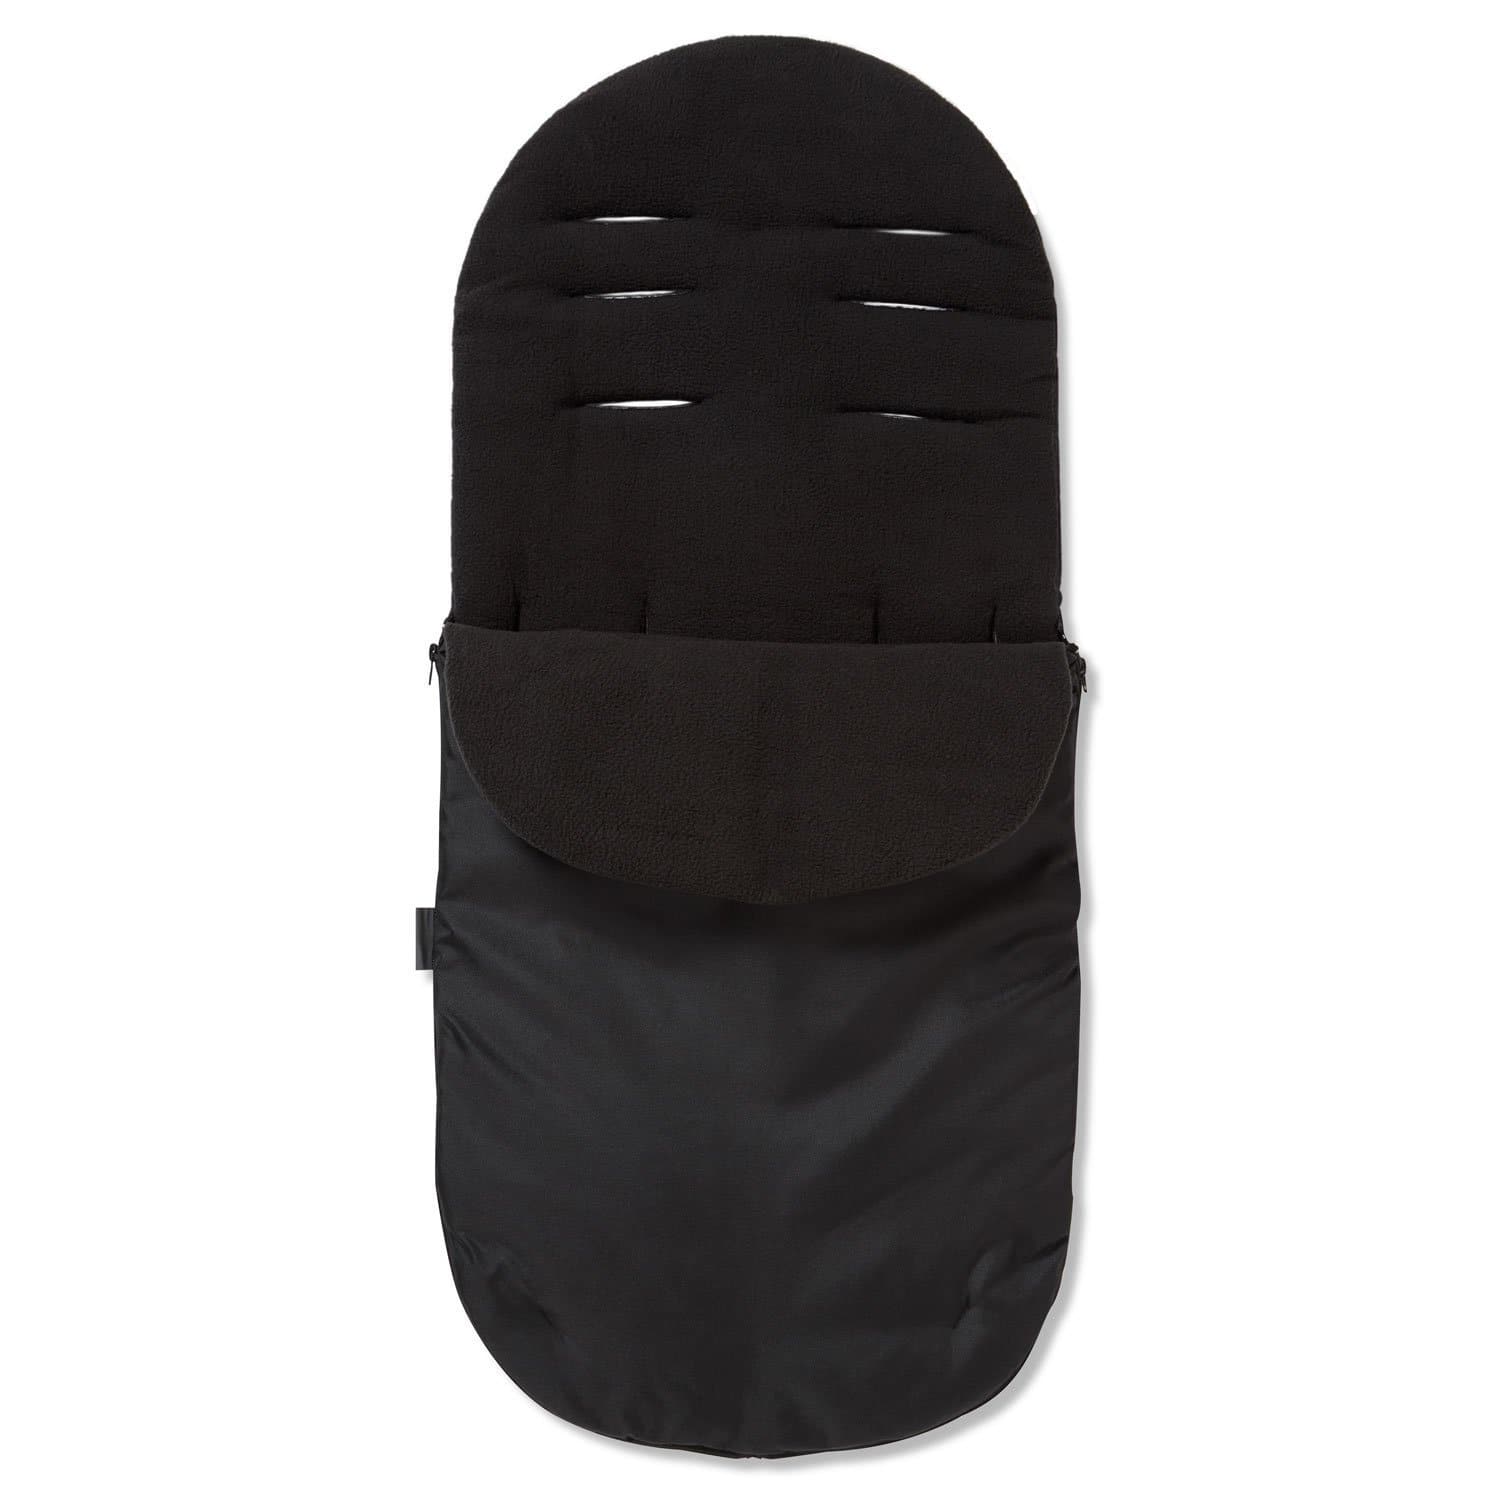 Footmuff / Cosy Toes Compatible with Nania - Black / Fits All Models | For Your Little One